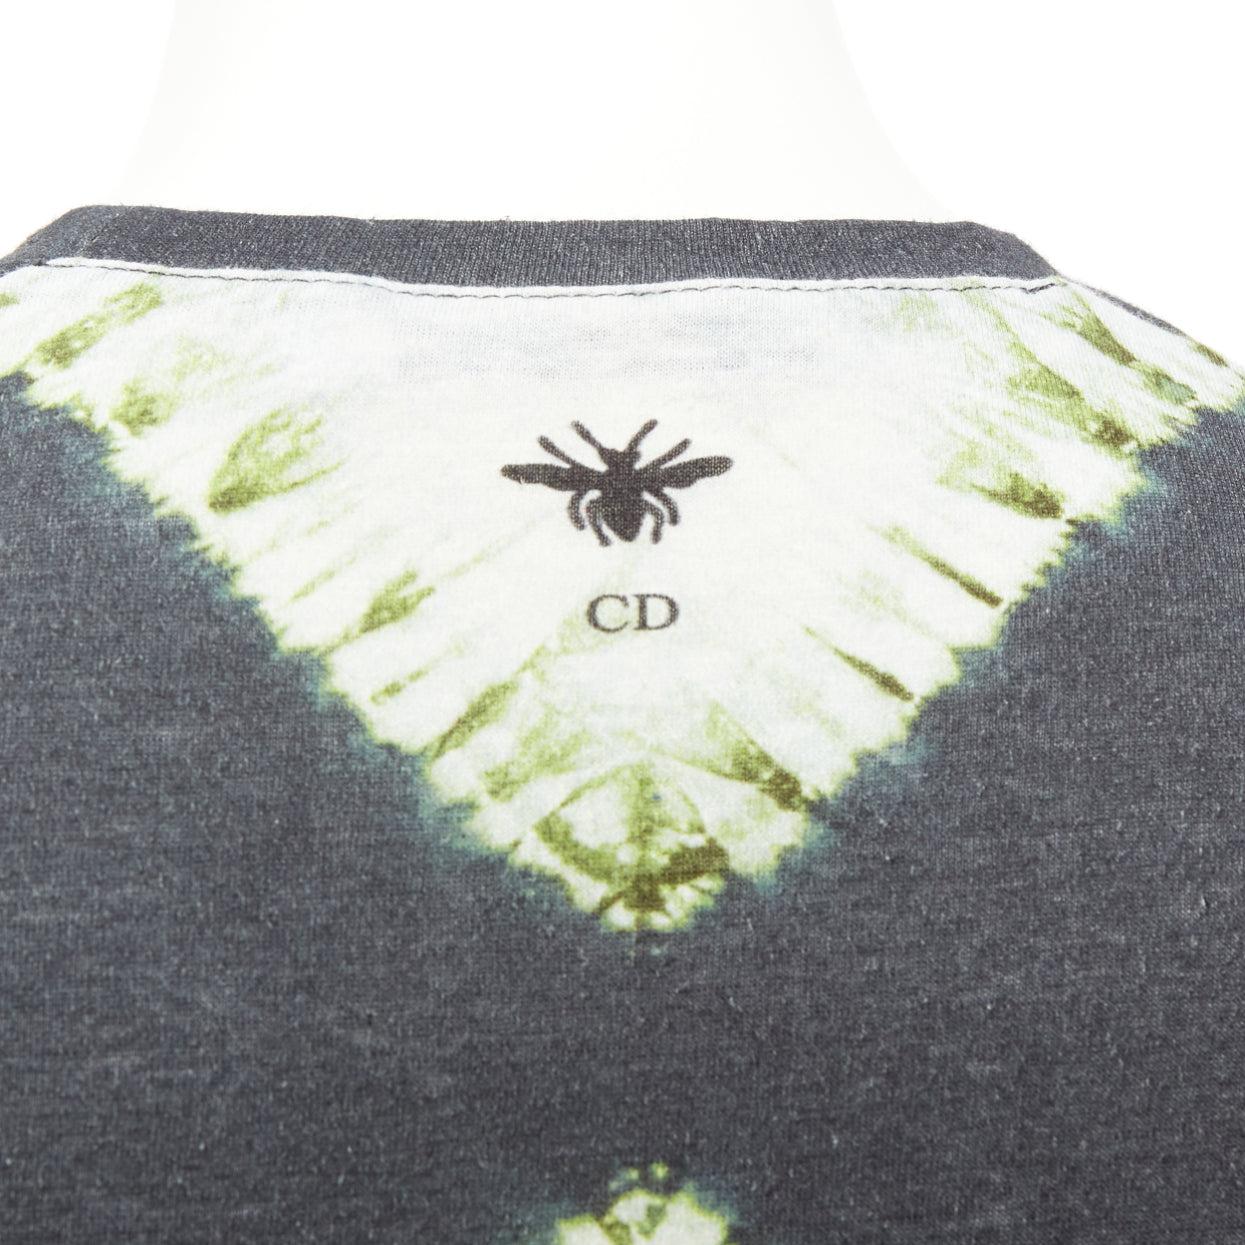 CHRISTIAN DIOR J'adior green grey tie dye cotton linen 8 tshirt XS
Reference: AAWC/A01119
Brand: Dior
Designer: Maria Grazia Chiuri
Collection: J'adior 8
Material: Cotton, Linen
Color: Green, Grey
Pattern: Tie Dye
Closure: Pullover
Extra Details: CD